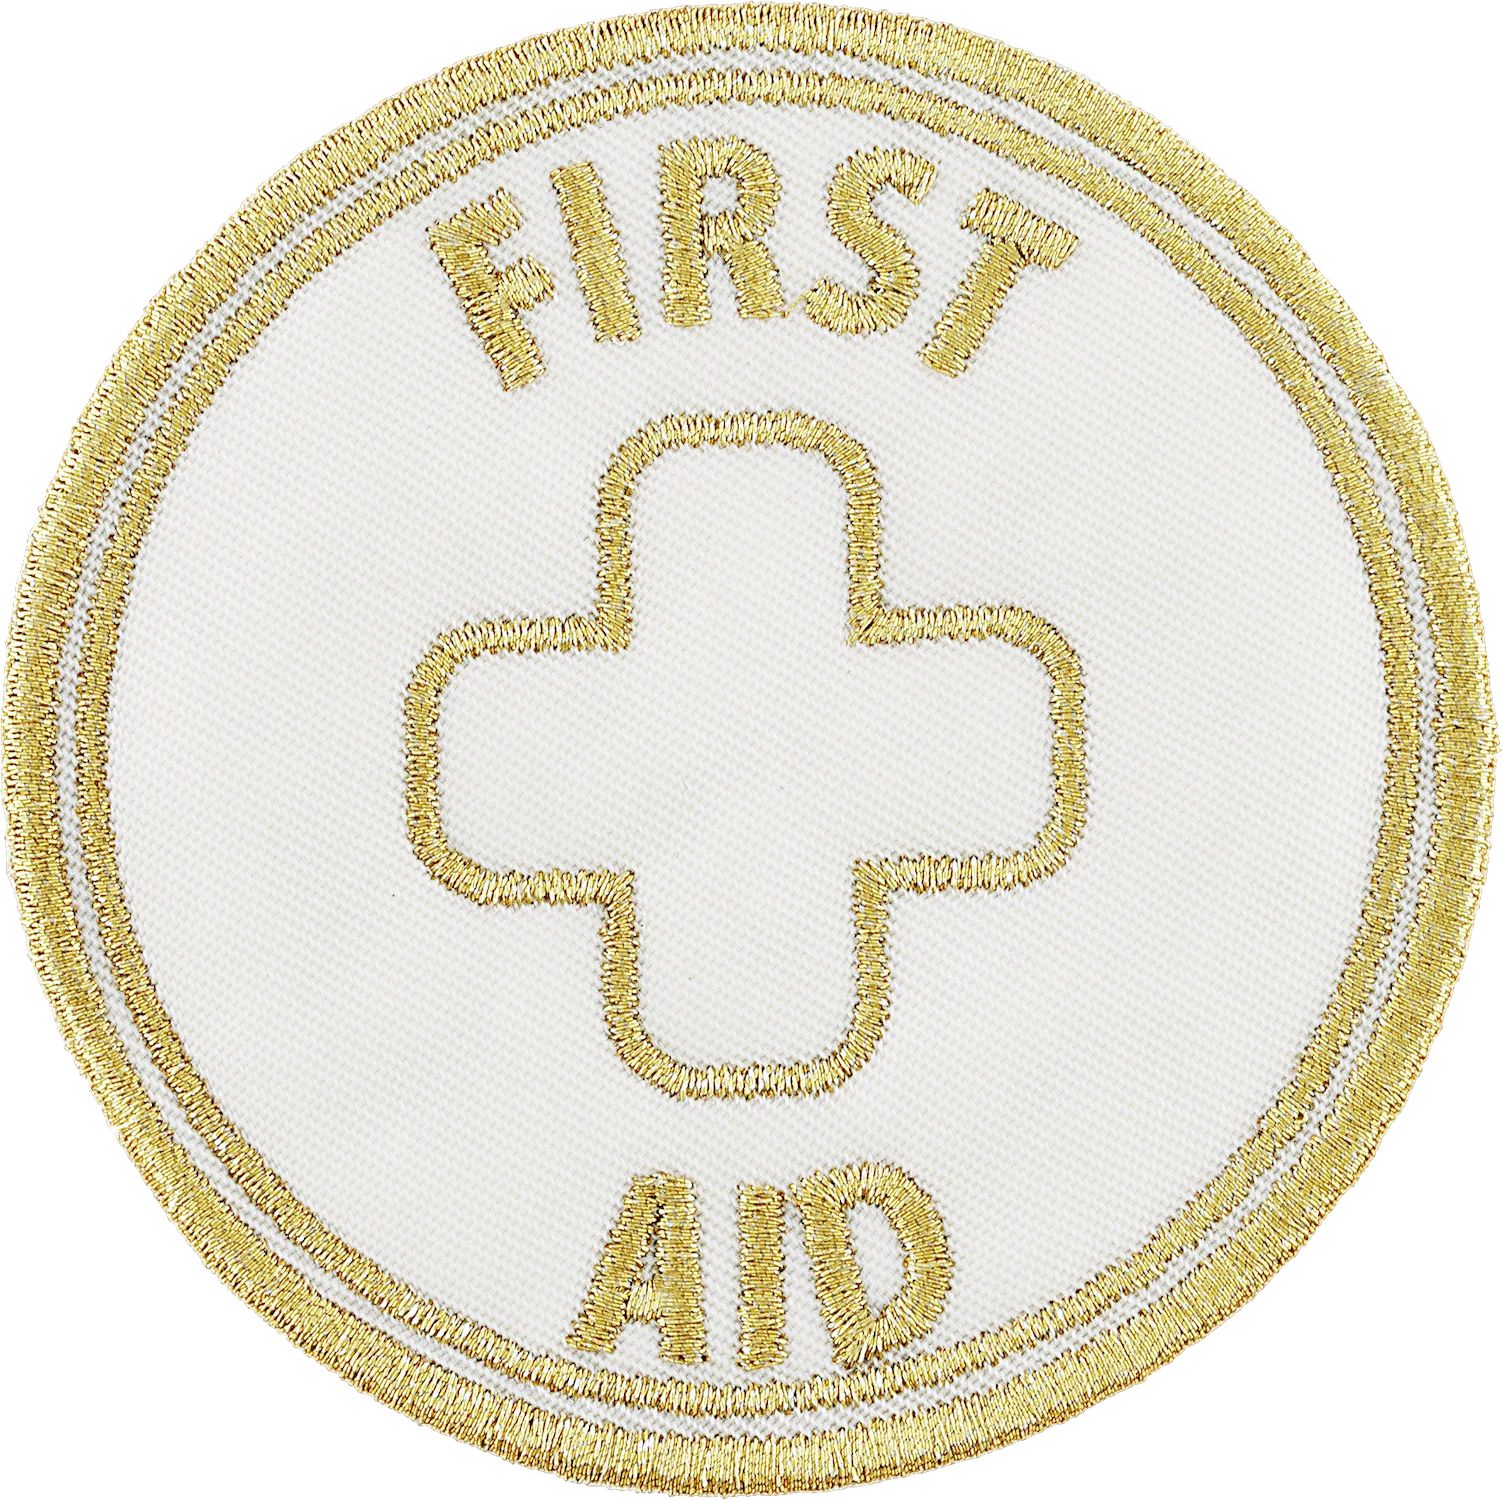 First Aid Patch | Stoney Clover Lane